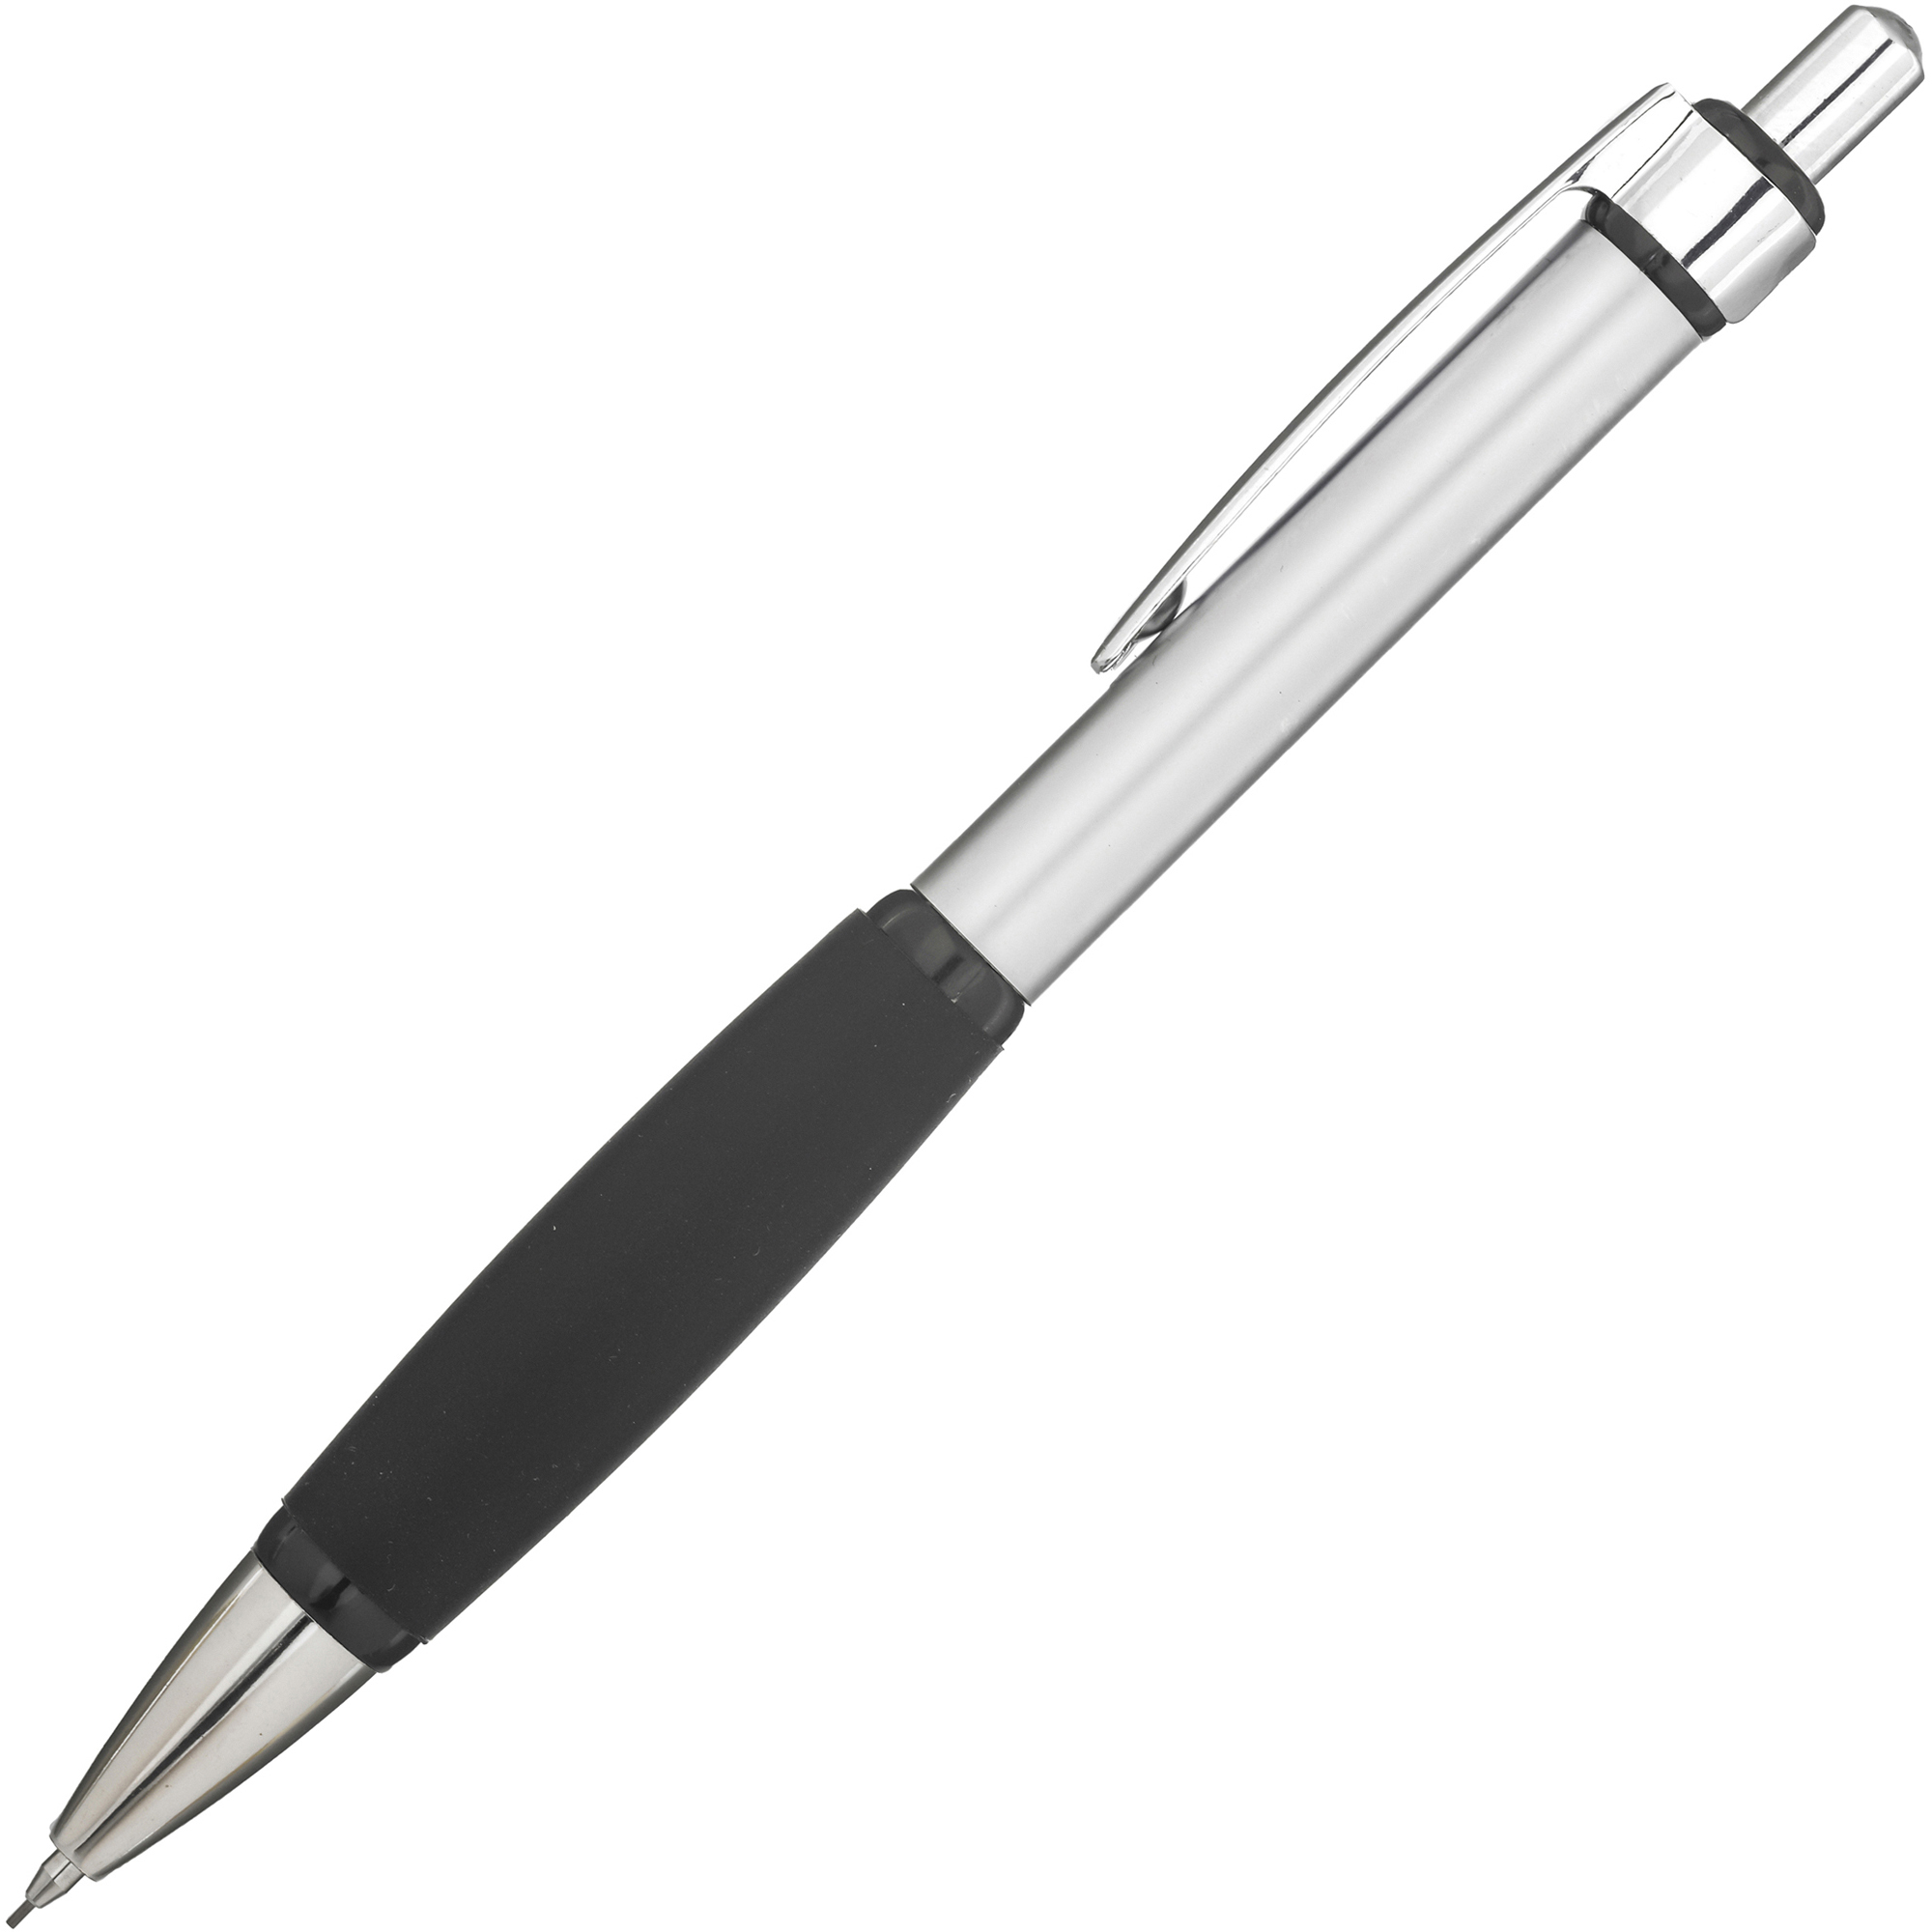 A 0.7mm pencil with a comfort grip. Makes a great set with a ball pen.